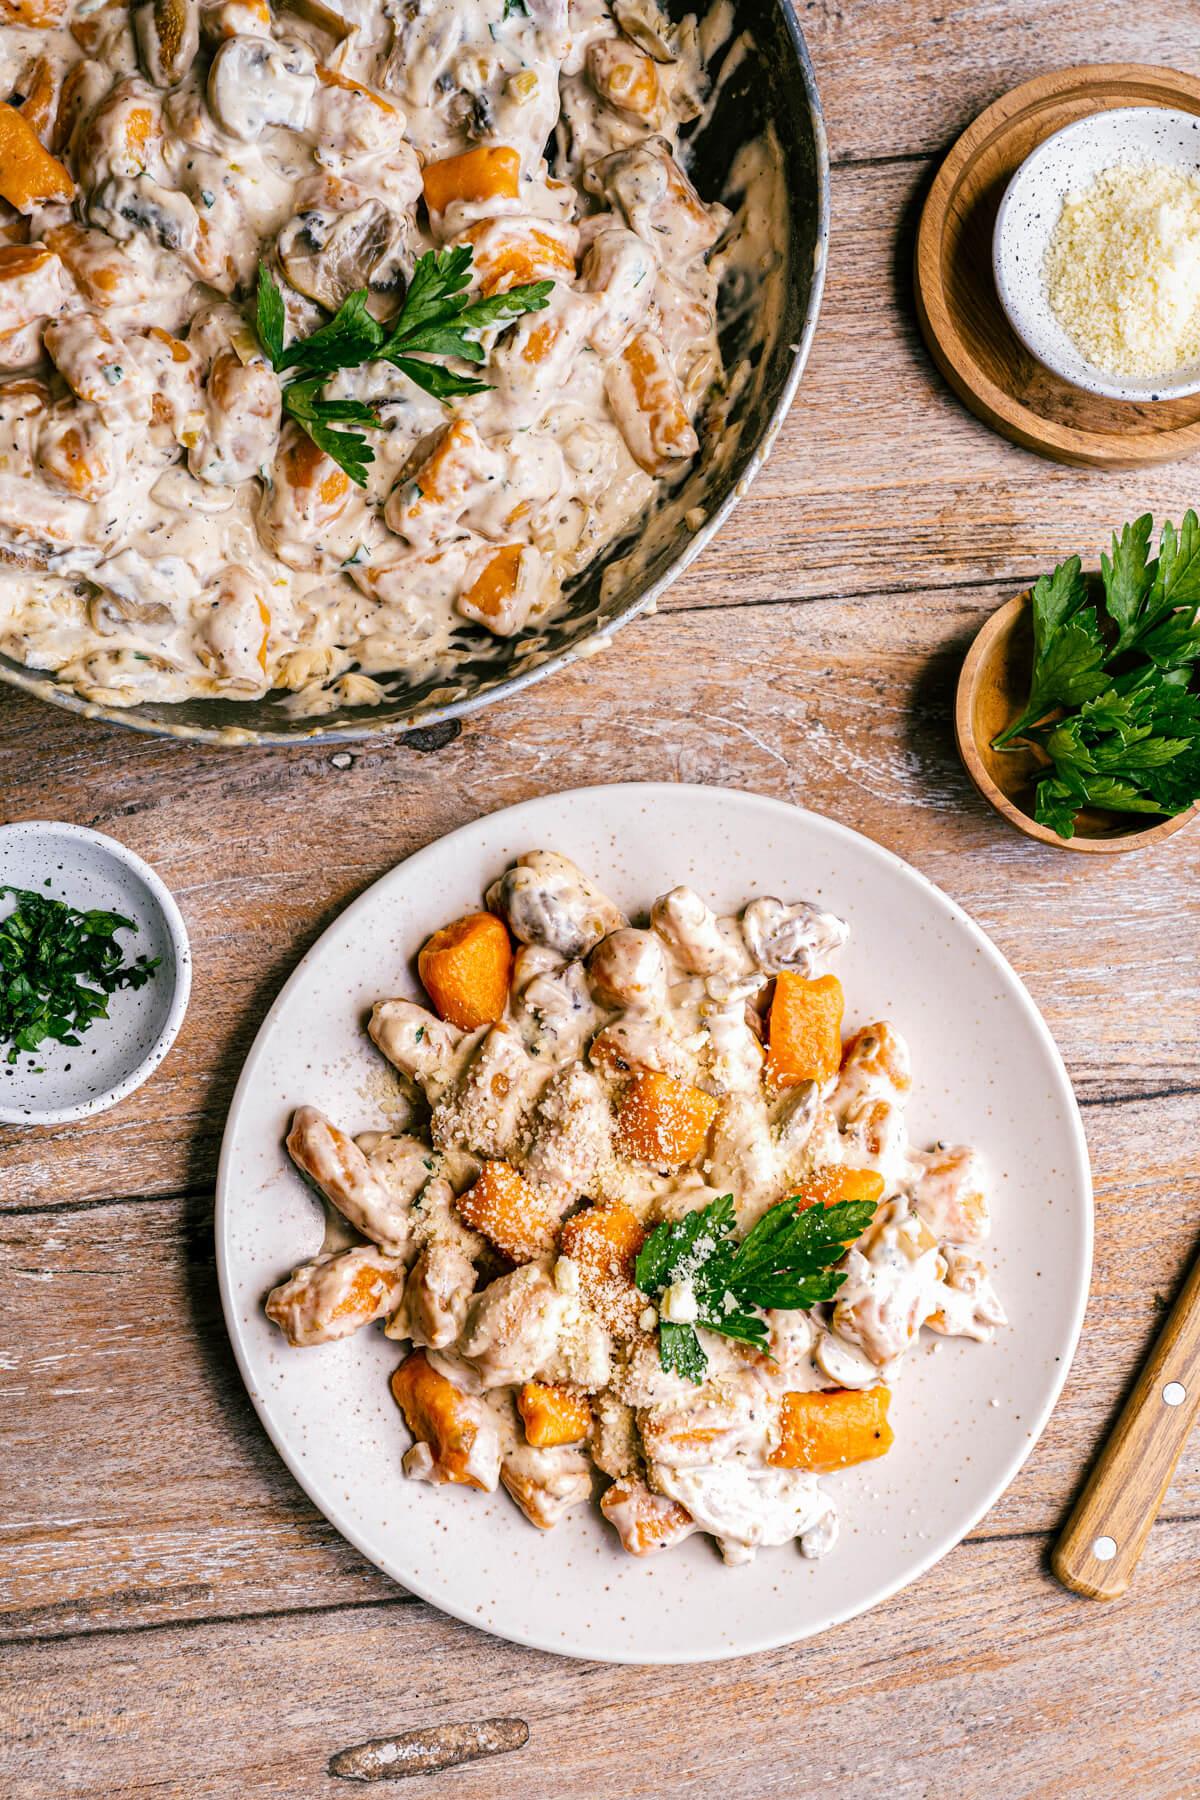 A table scene with a pan full of vibrant orange sweet potato gnocchi swimming in a creamy mushroom sauce beside a plate with a serving of creamy mushroom gnocchi.